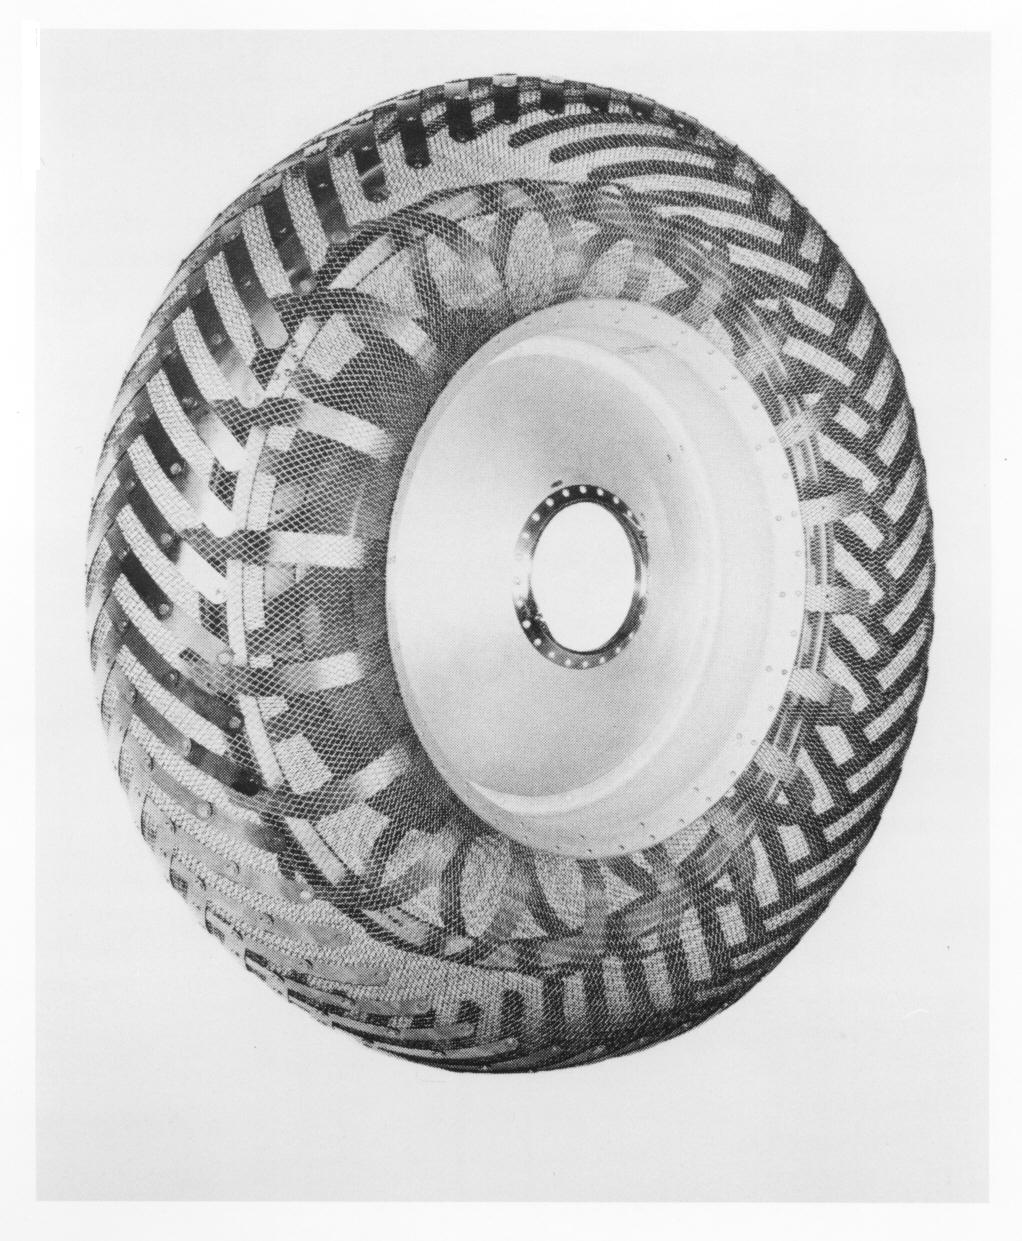 -Wire-mesh wheels for the Lunar Roving Vehicle for NASA s Apollo missions, developed by the Boeing- General Motors team, are woven with steel wire and girded with titanium chevrons.